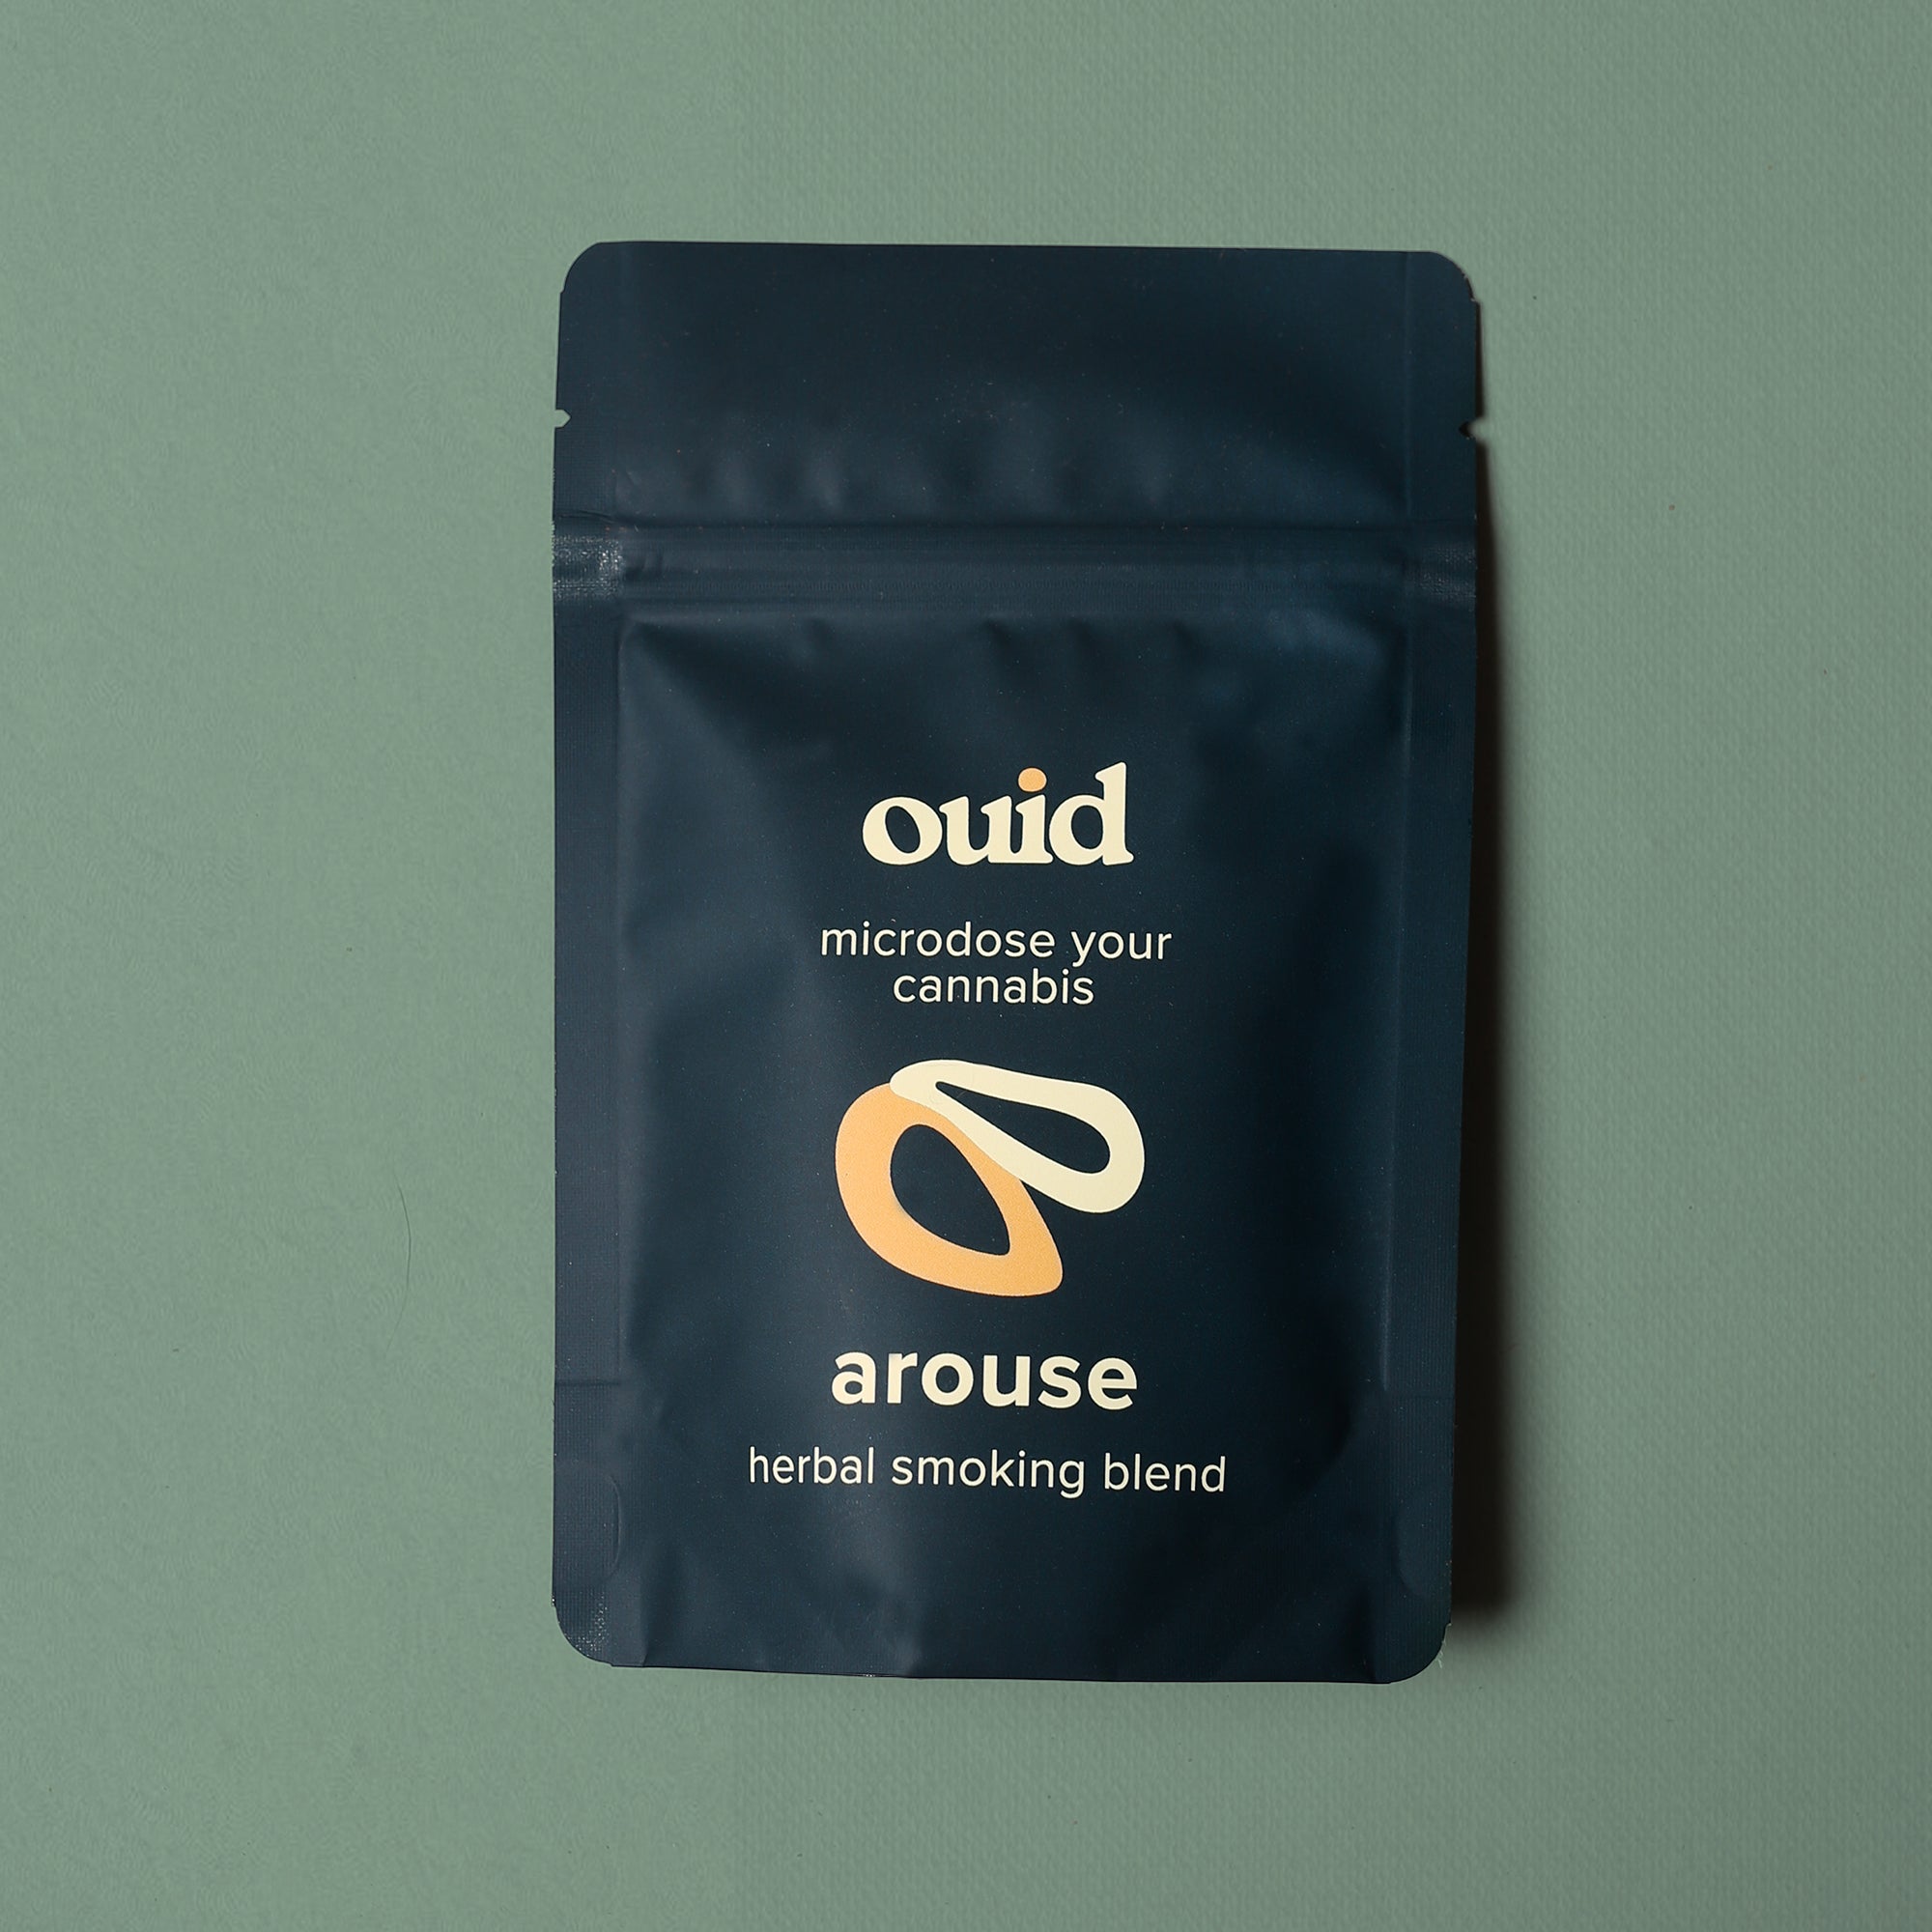 Ouid Arouse Blend